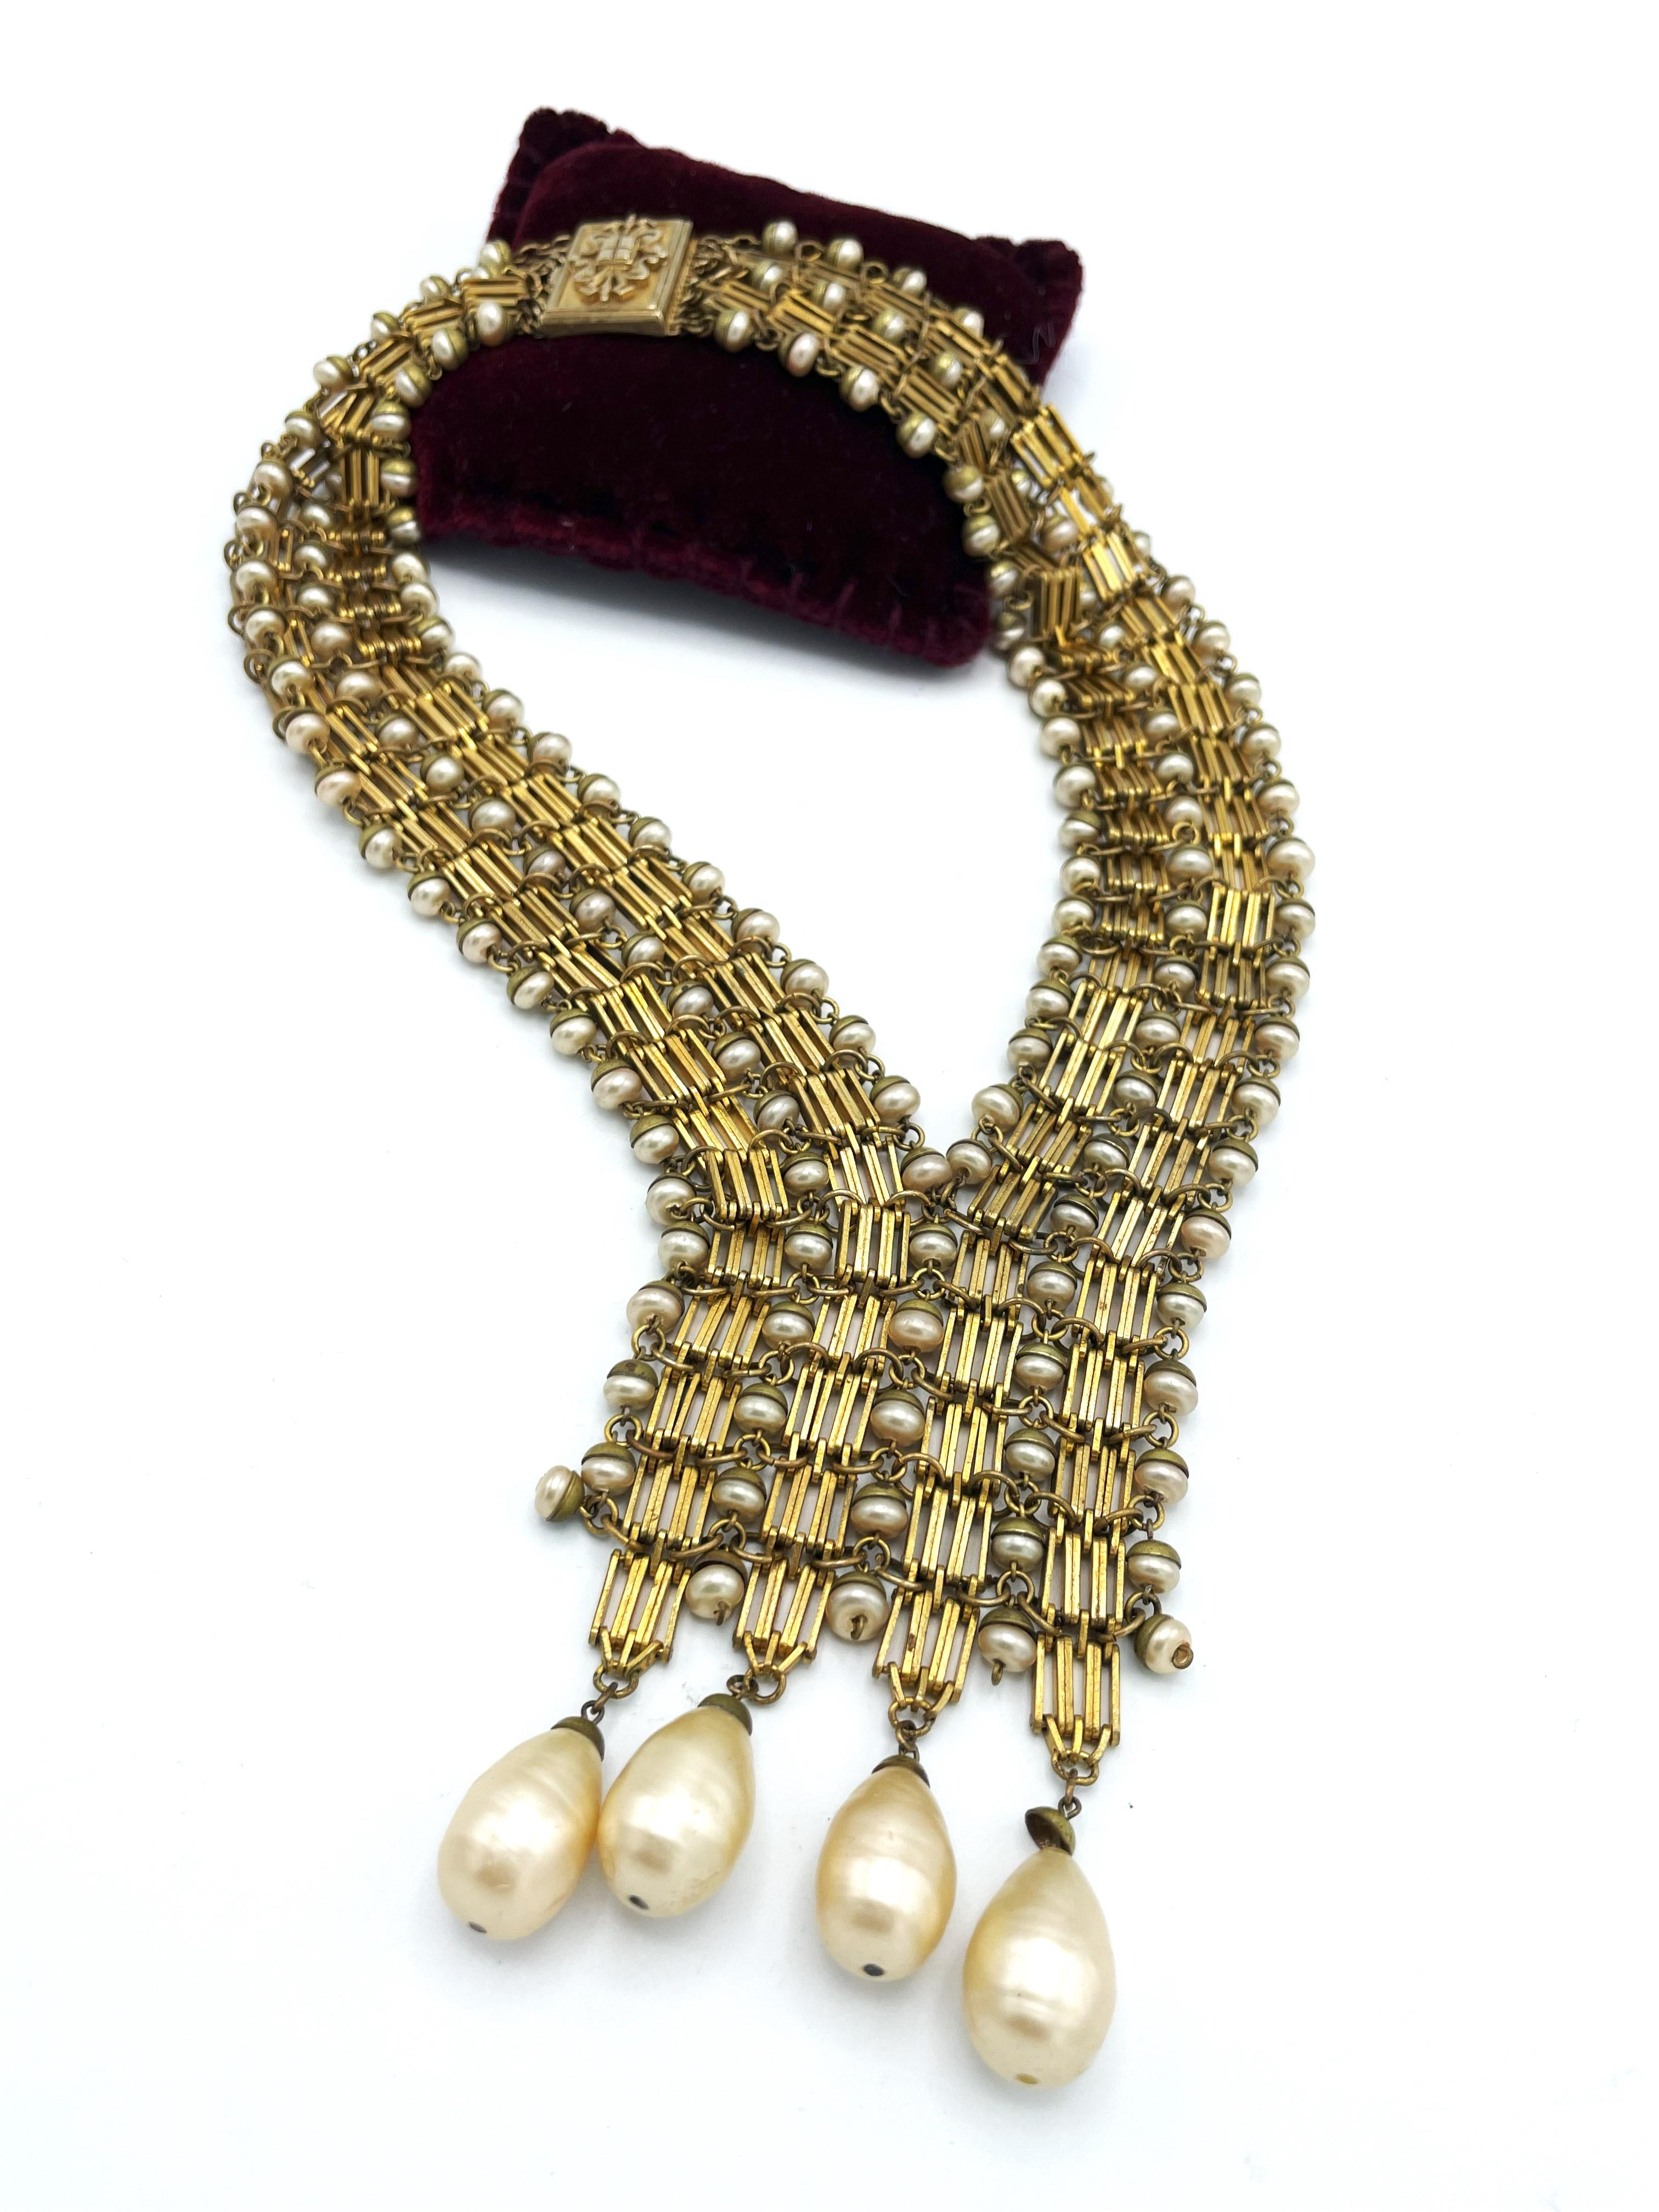  V-SHAPED NECKLACE, early 1940's, gold plated, handmade pearls, Made in France  For Sale 2